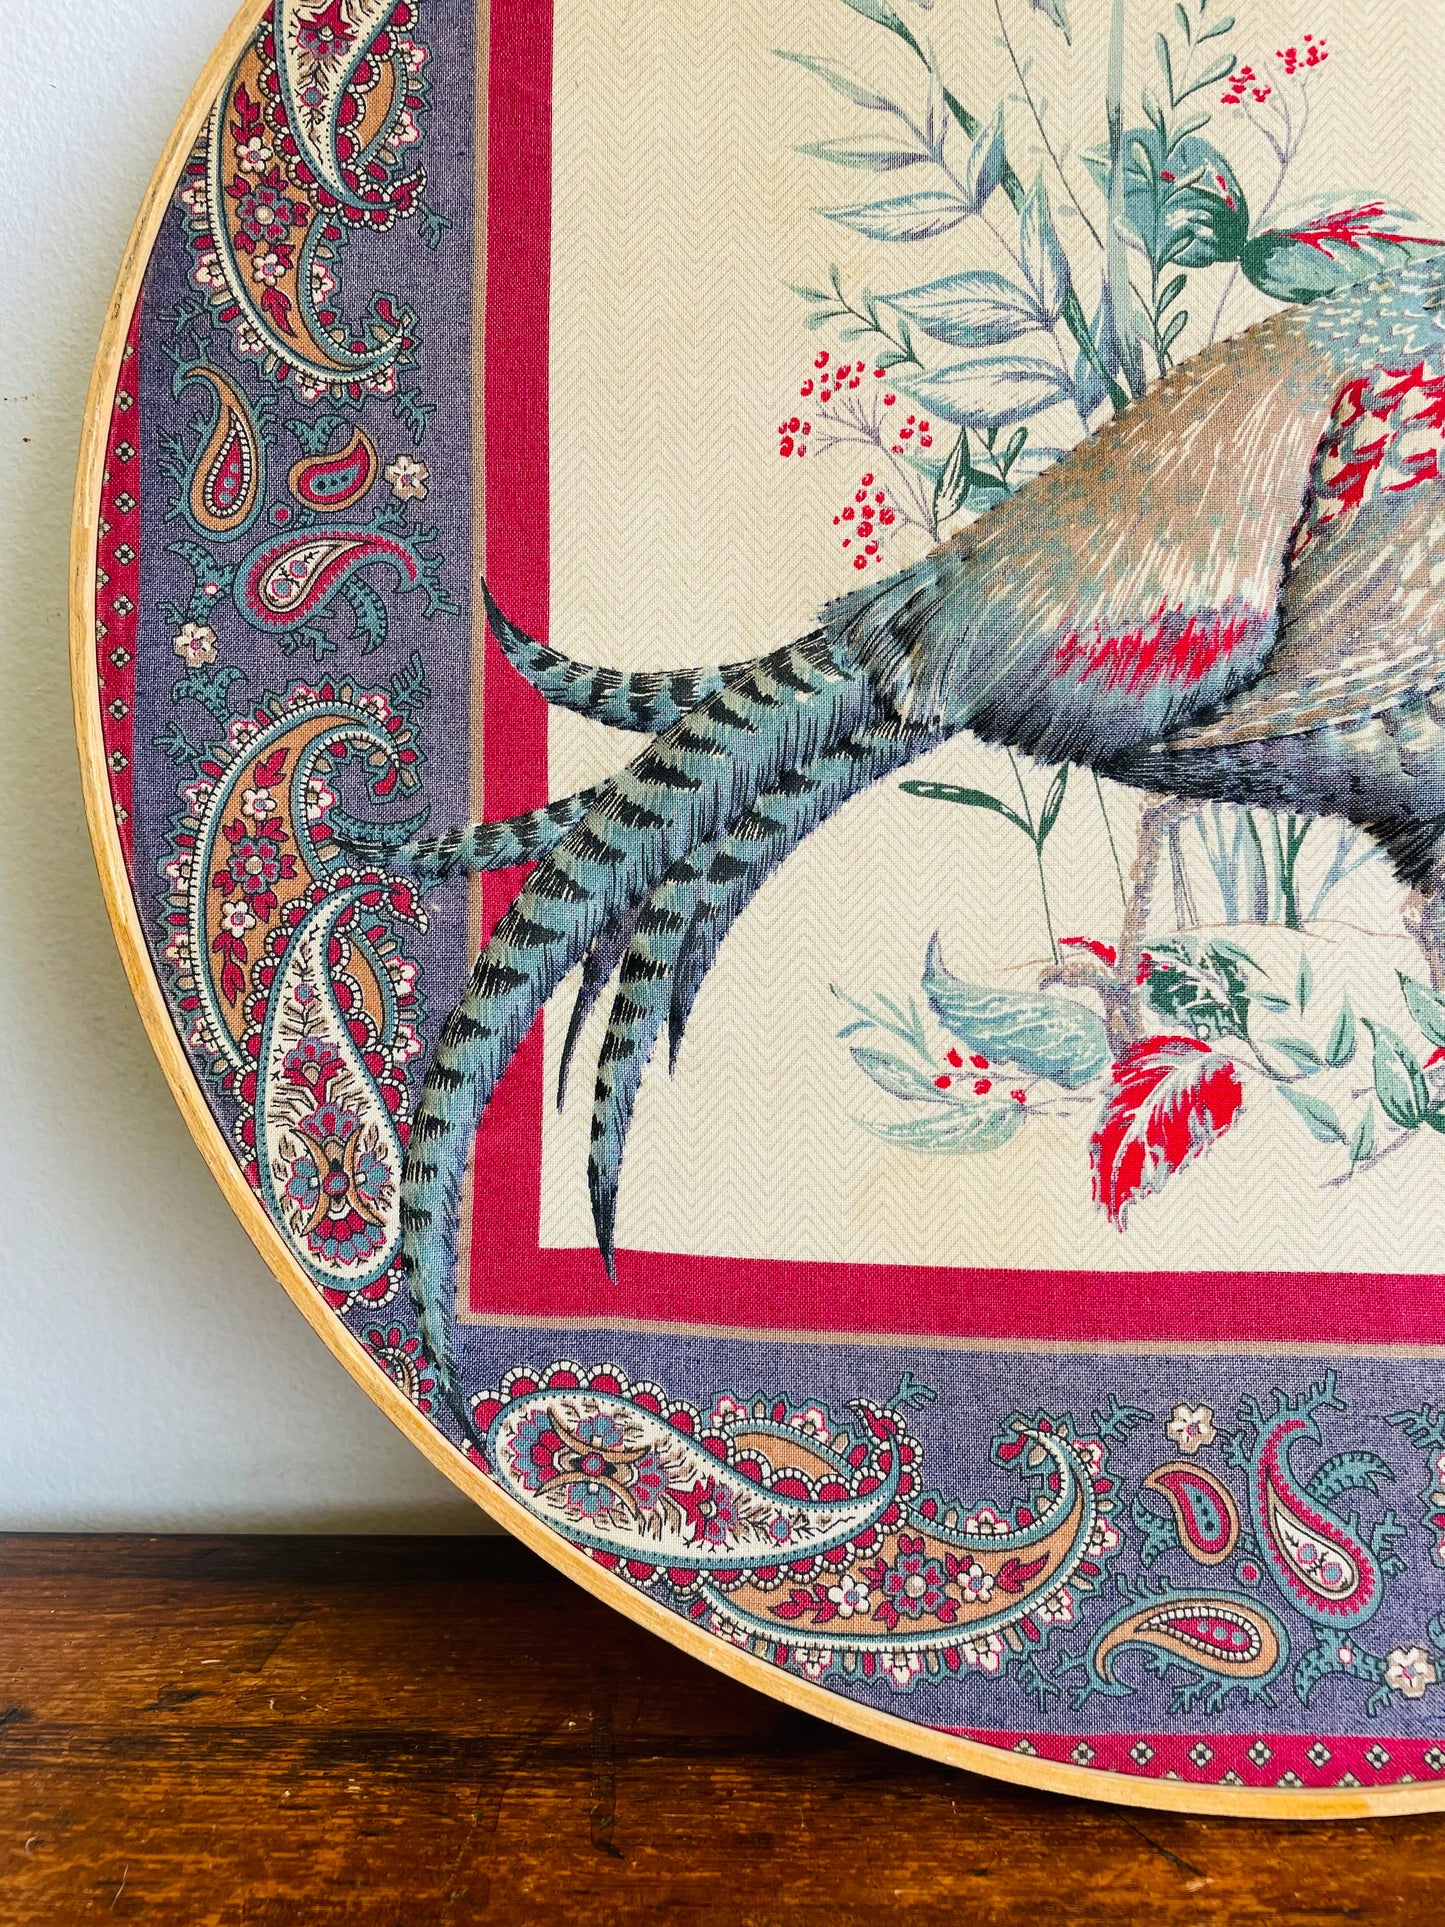 Fabric Embroidery Hoop Art Picture - Pheasant Bird Among Foliage